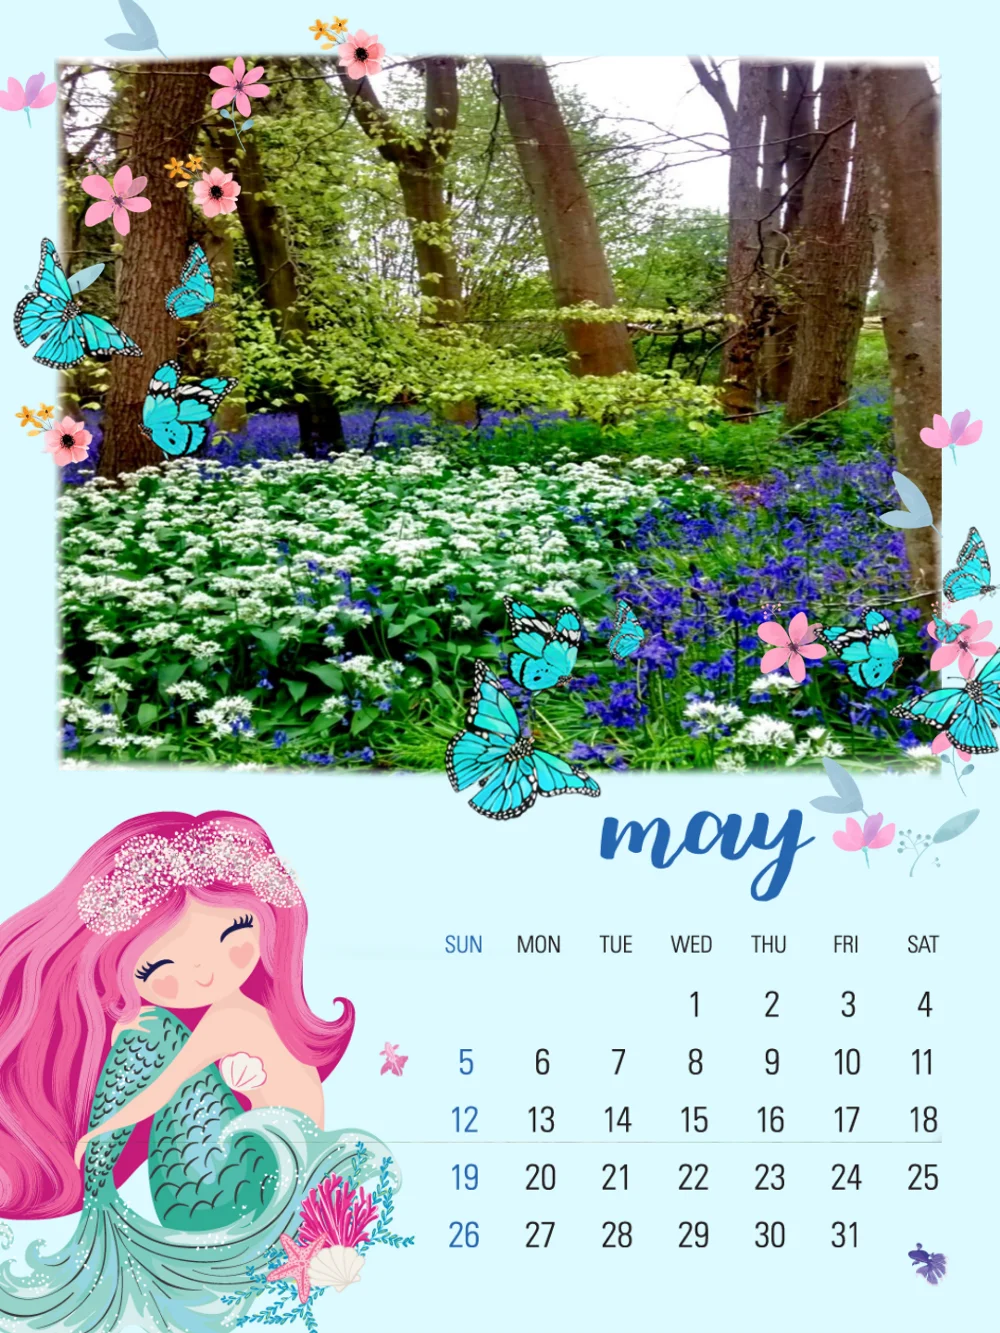 #spring#may#calander #flowers#nature#butterflies #brushes 